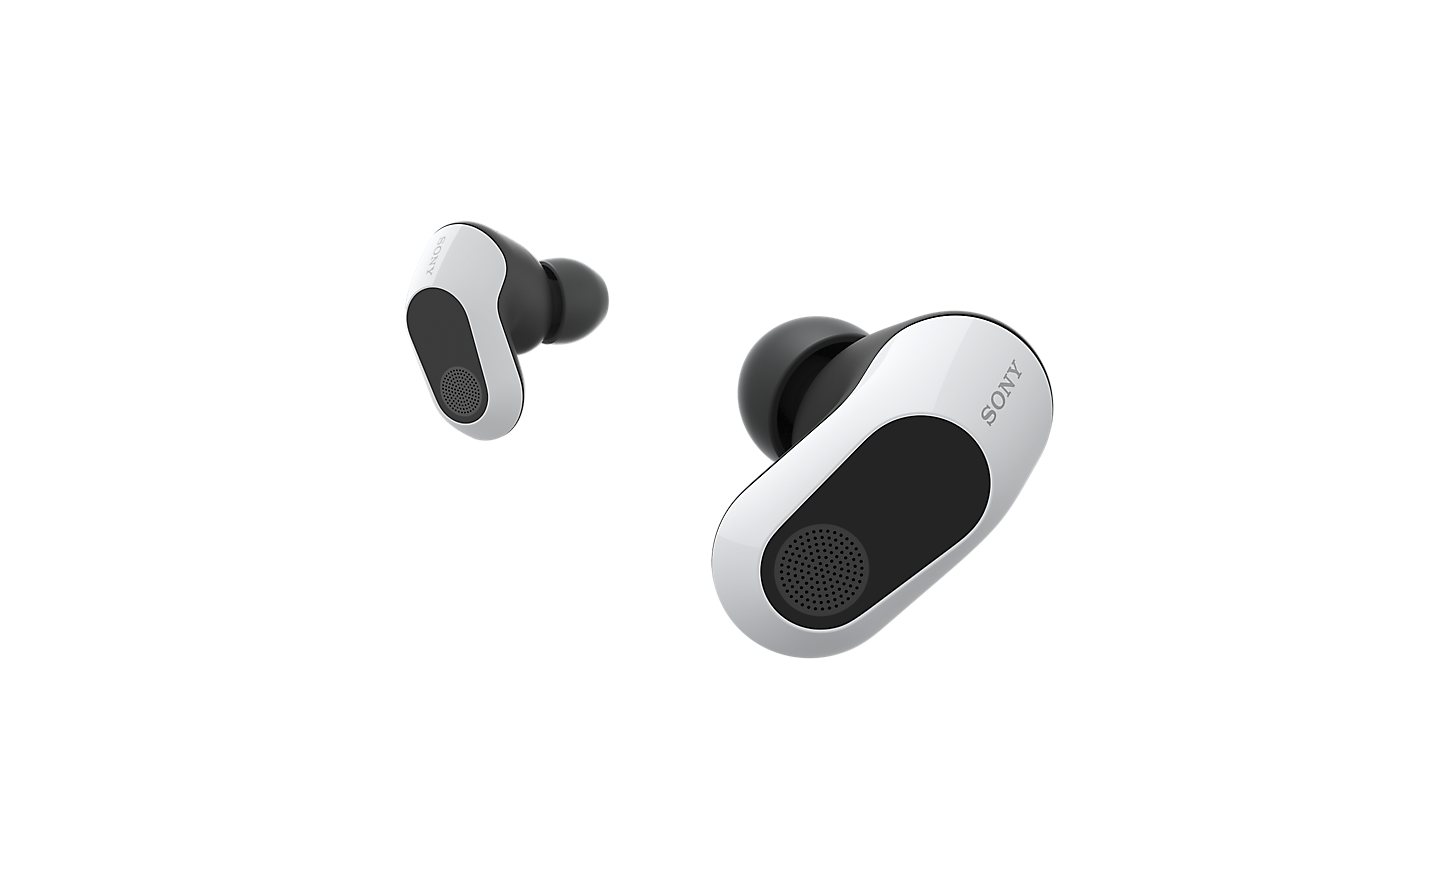 Various images of the INZONE Buds headphones shot at different angles